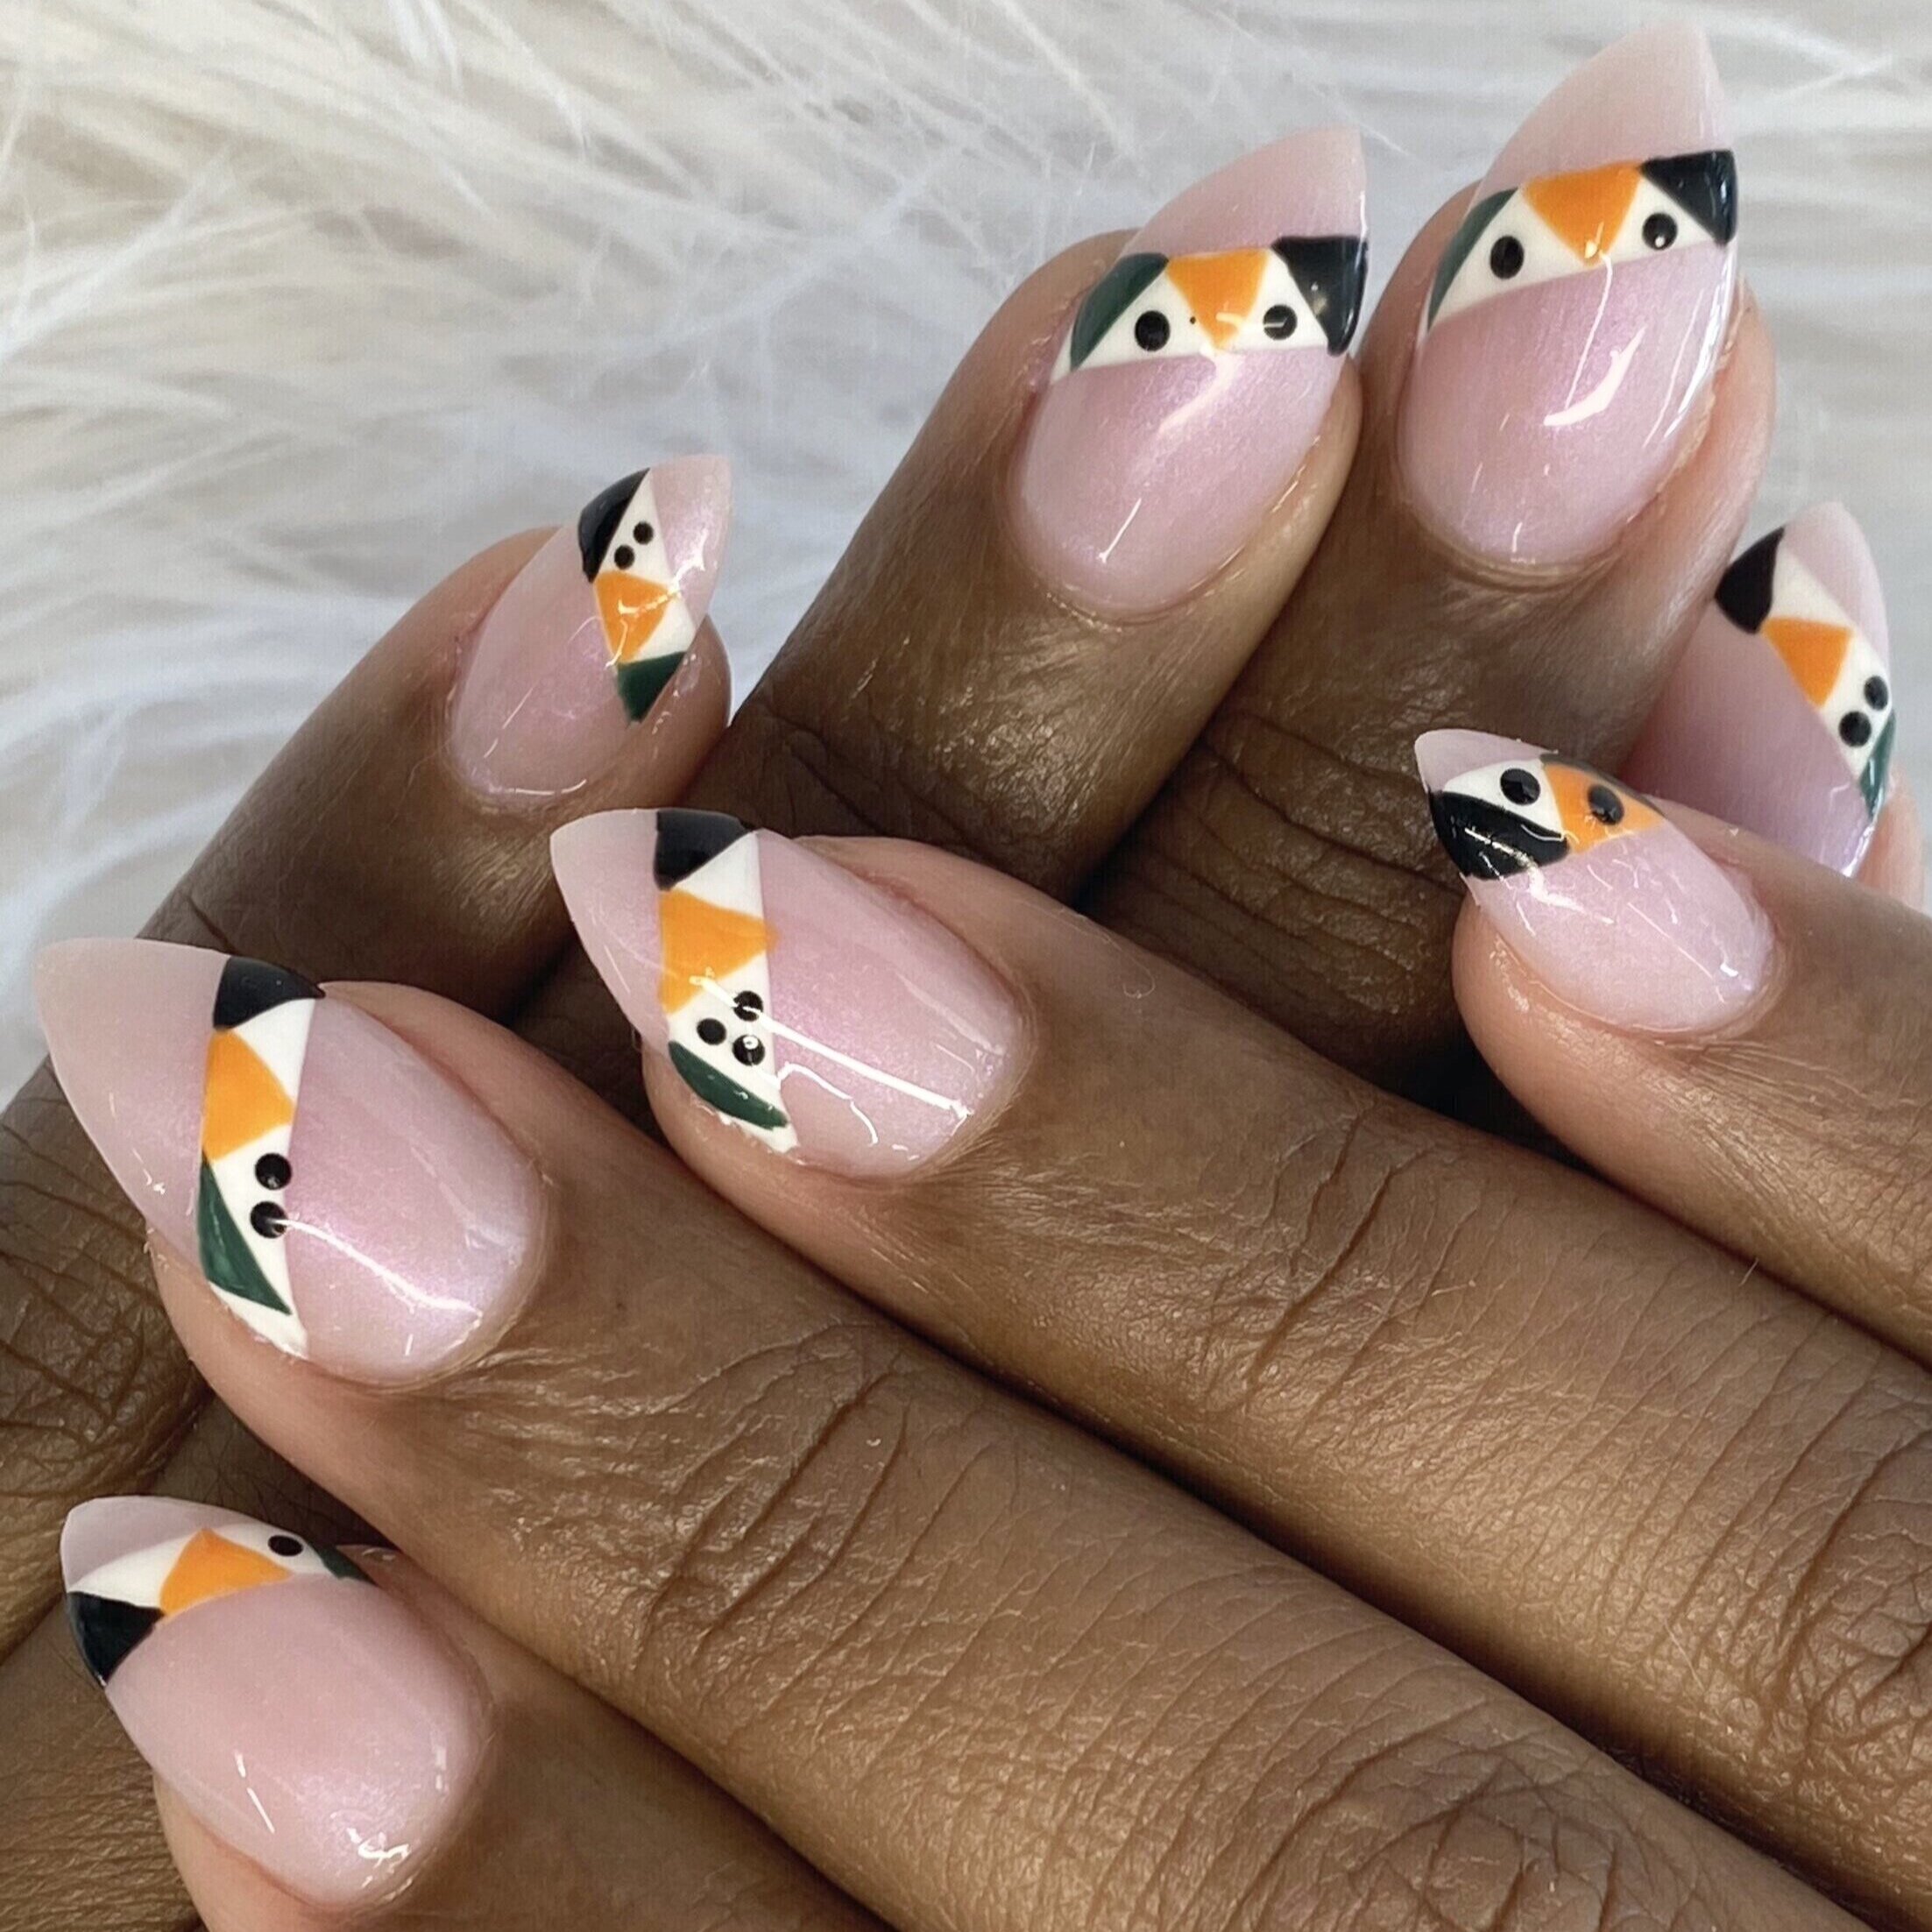 Cuticle Tattoos! A New Way To Dress Up Your Nails | Beautylish